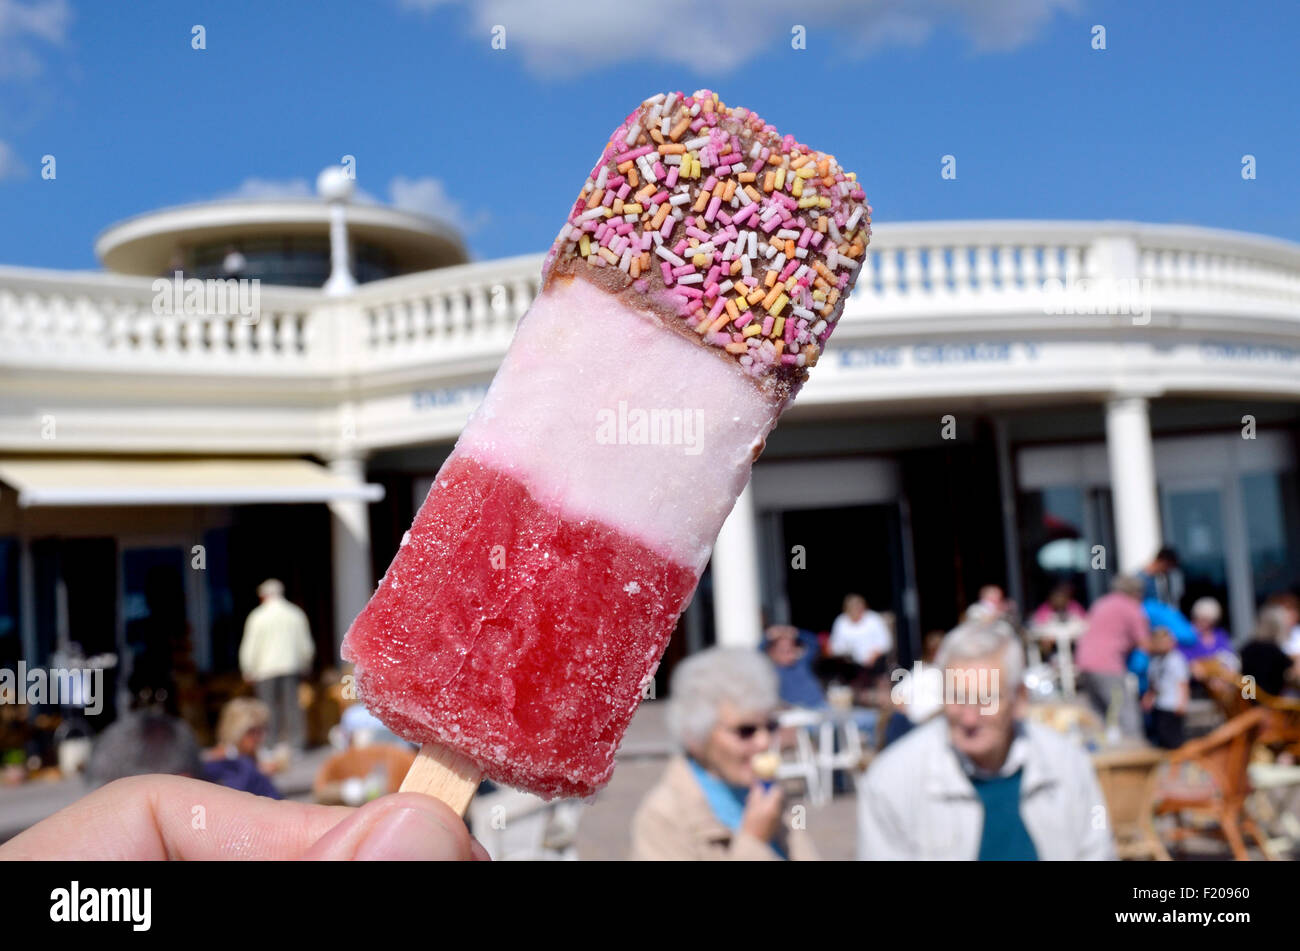 Strawberry Fab ice lolly at the seaside. Bexhill-on-Sea, East Sussex, England, UK. Stock Photo